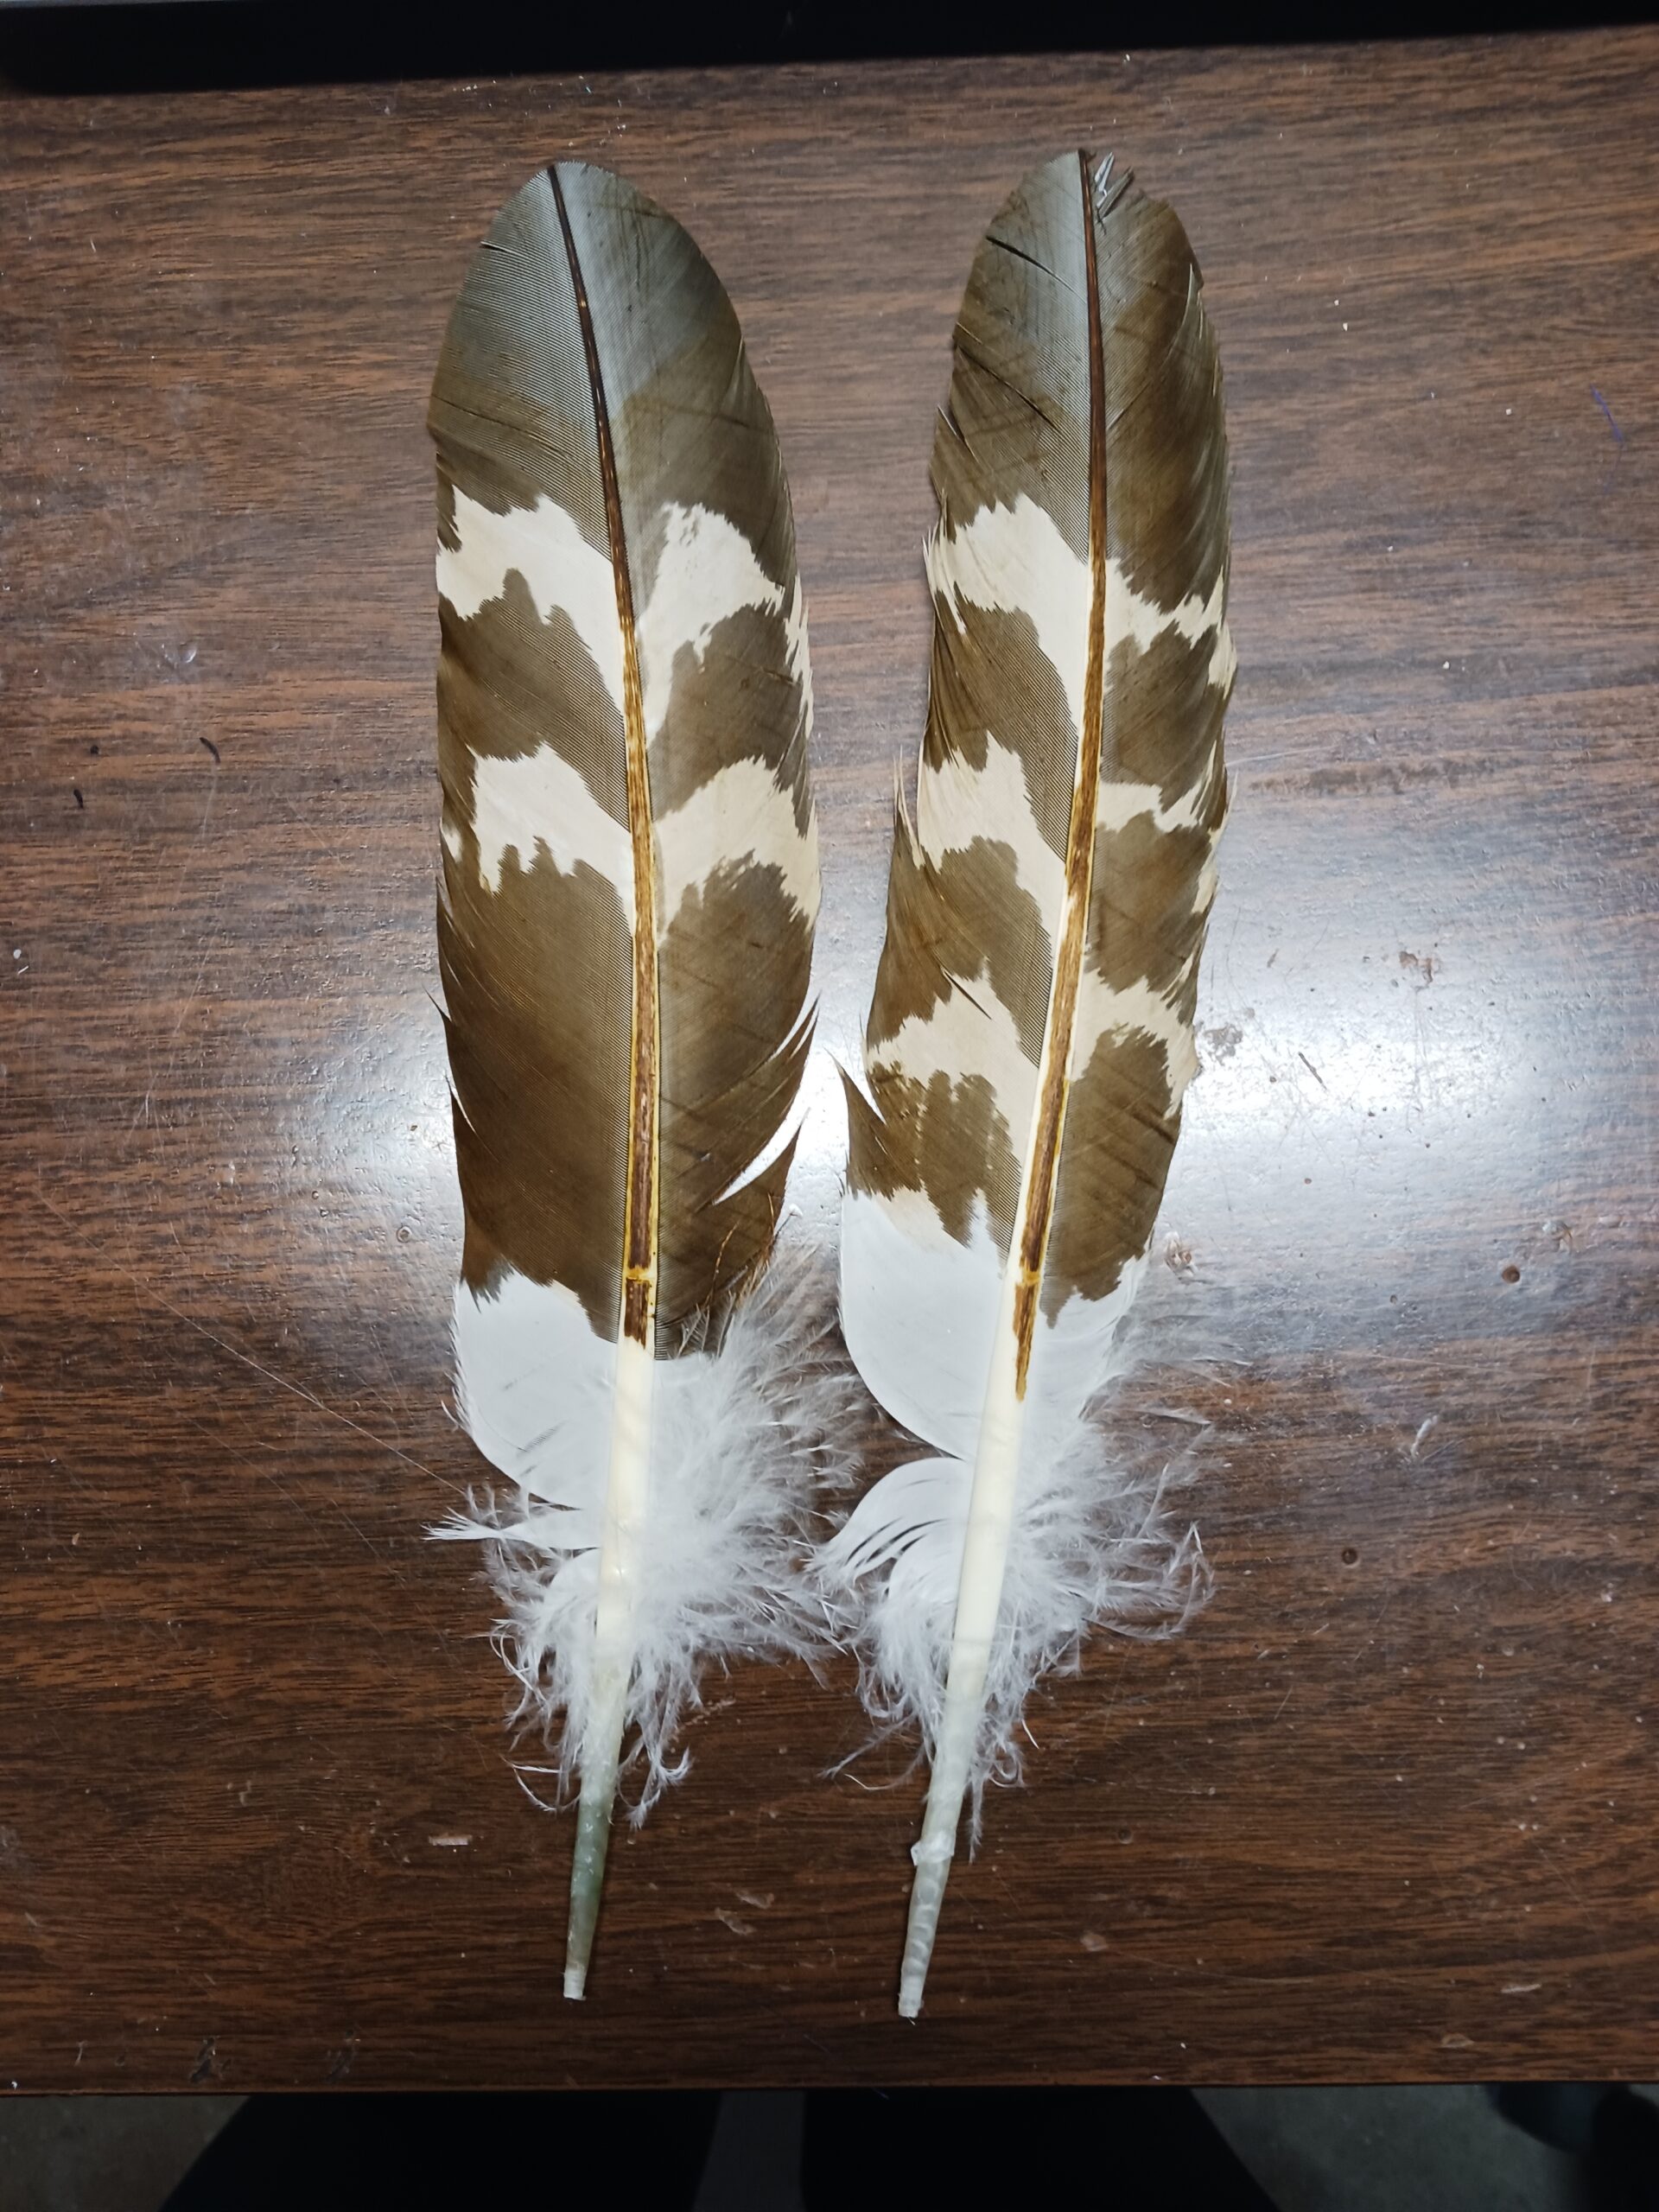 Sample Imitation Eagle Feathers Gallery – Two Eagles Legacy